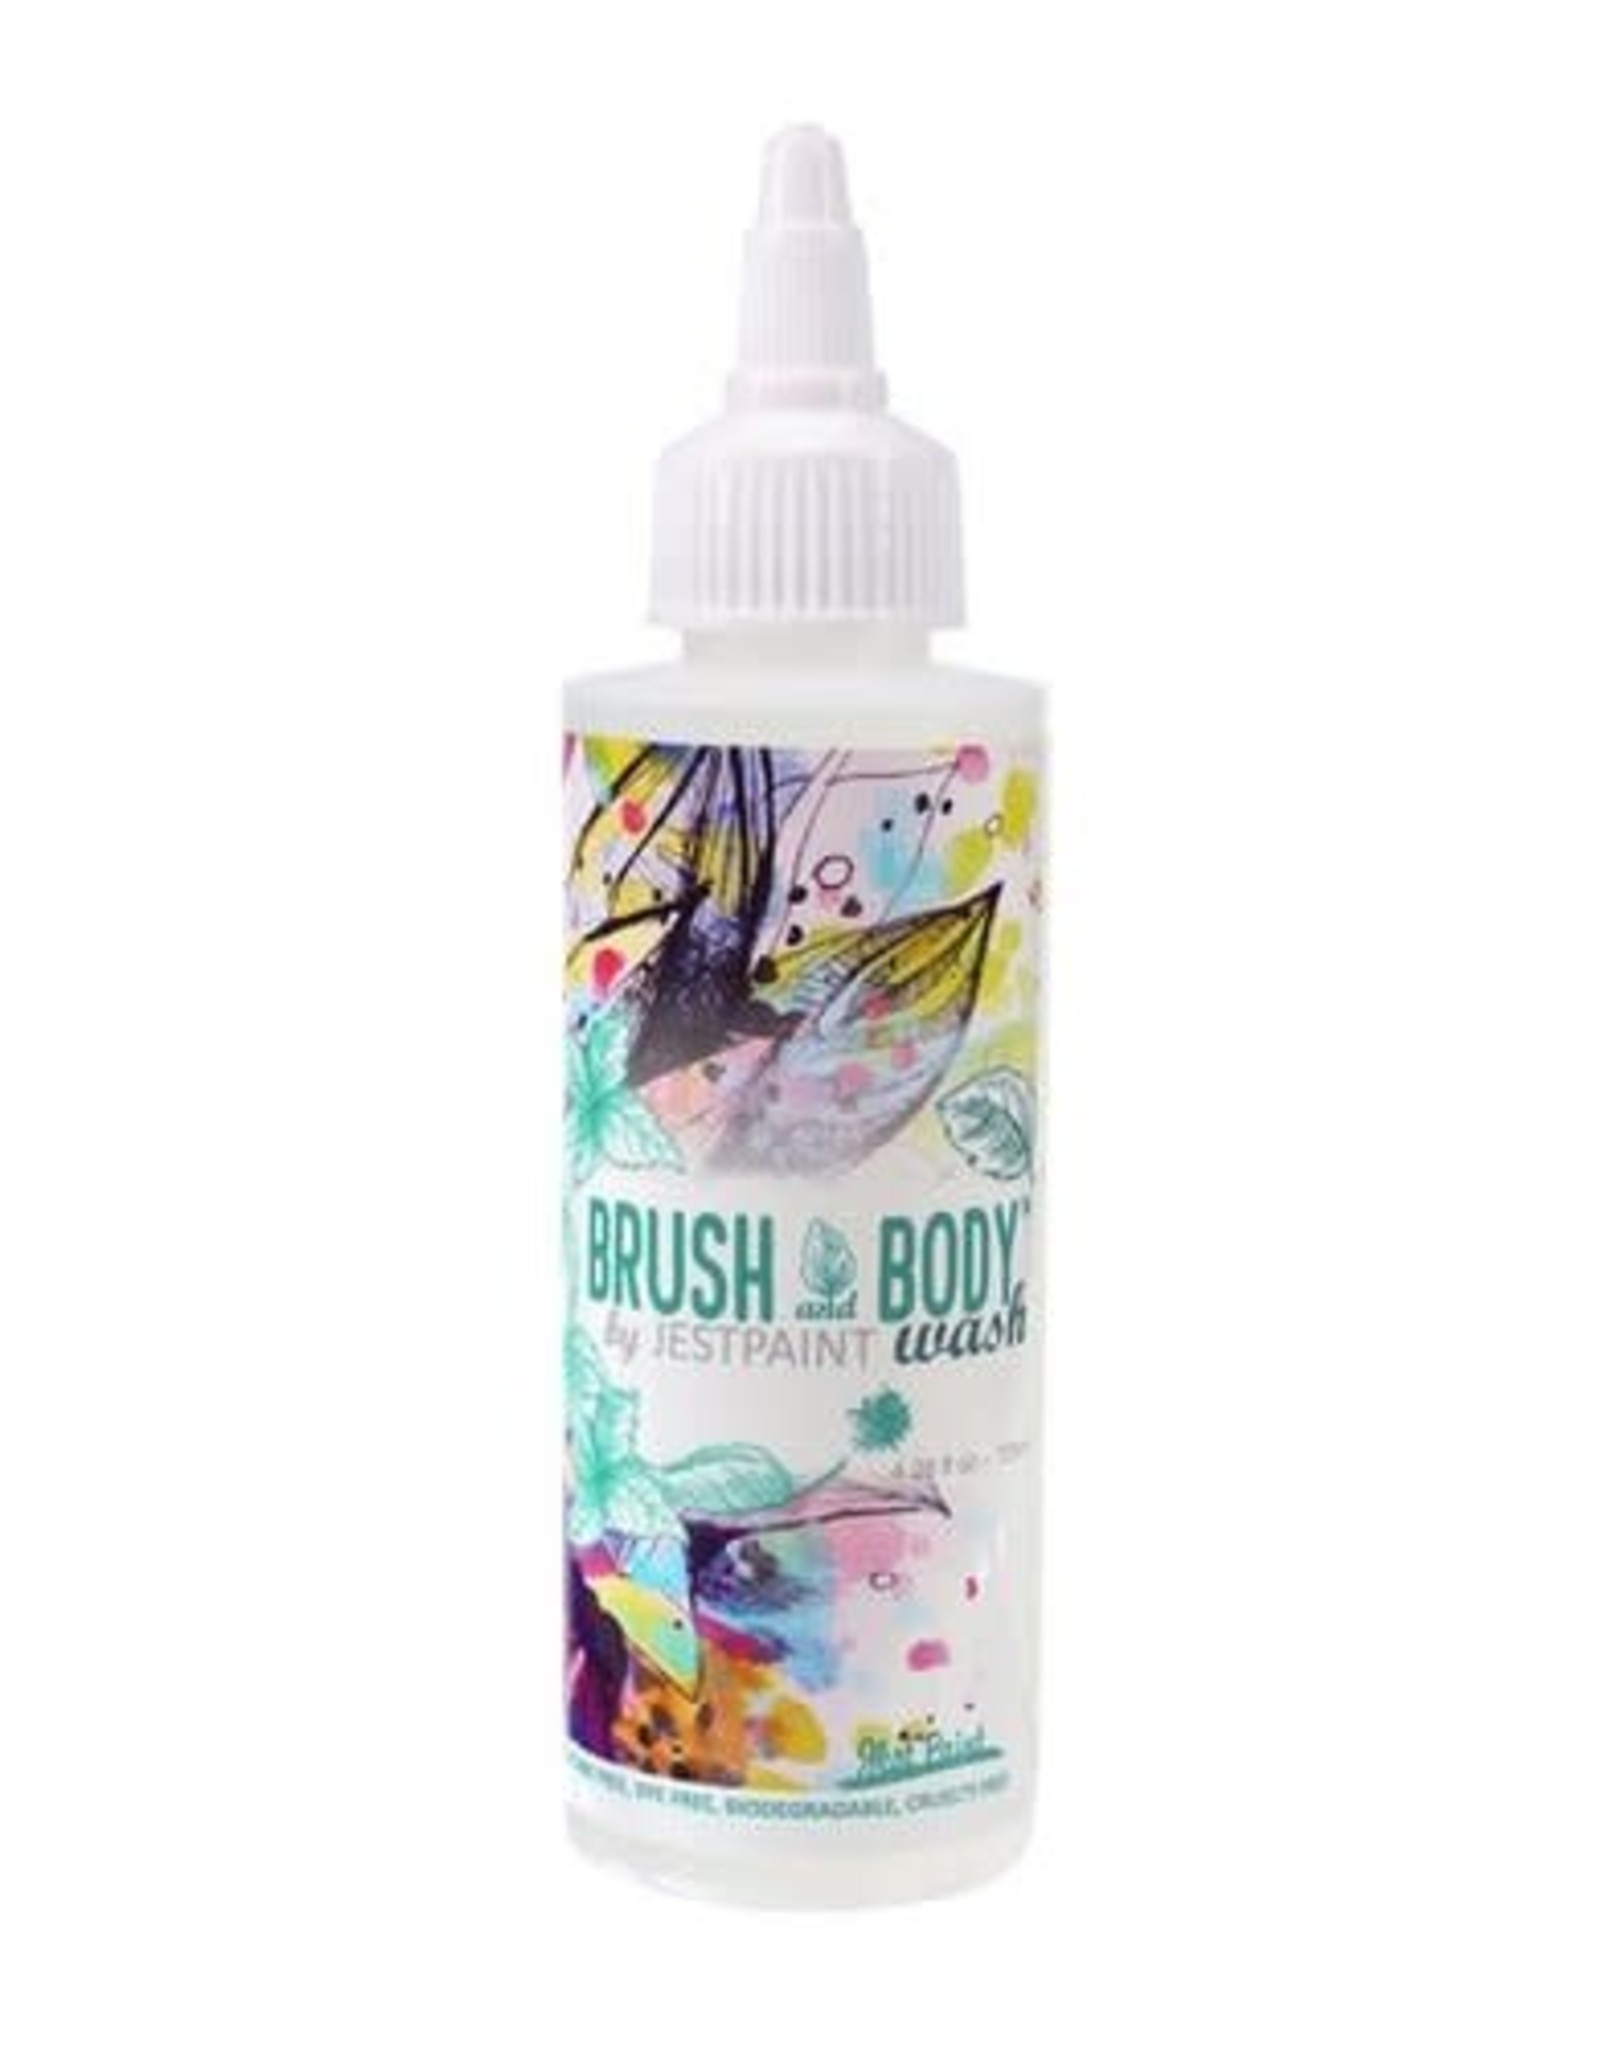 Fusion Brush and Body wash by Jestpaint